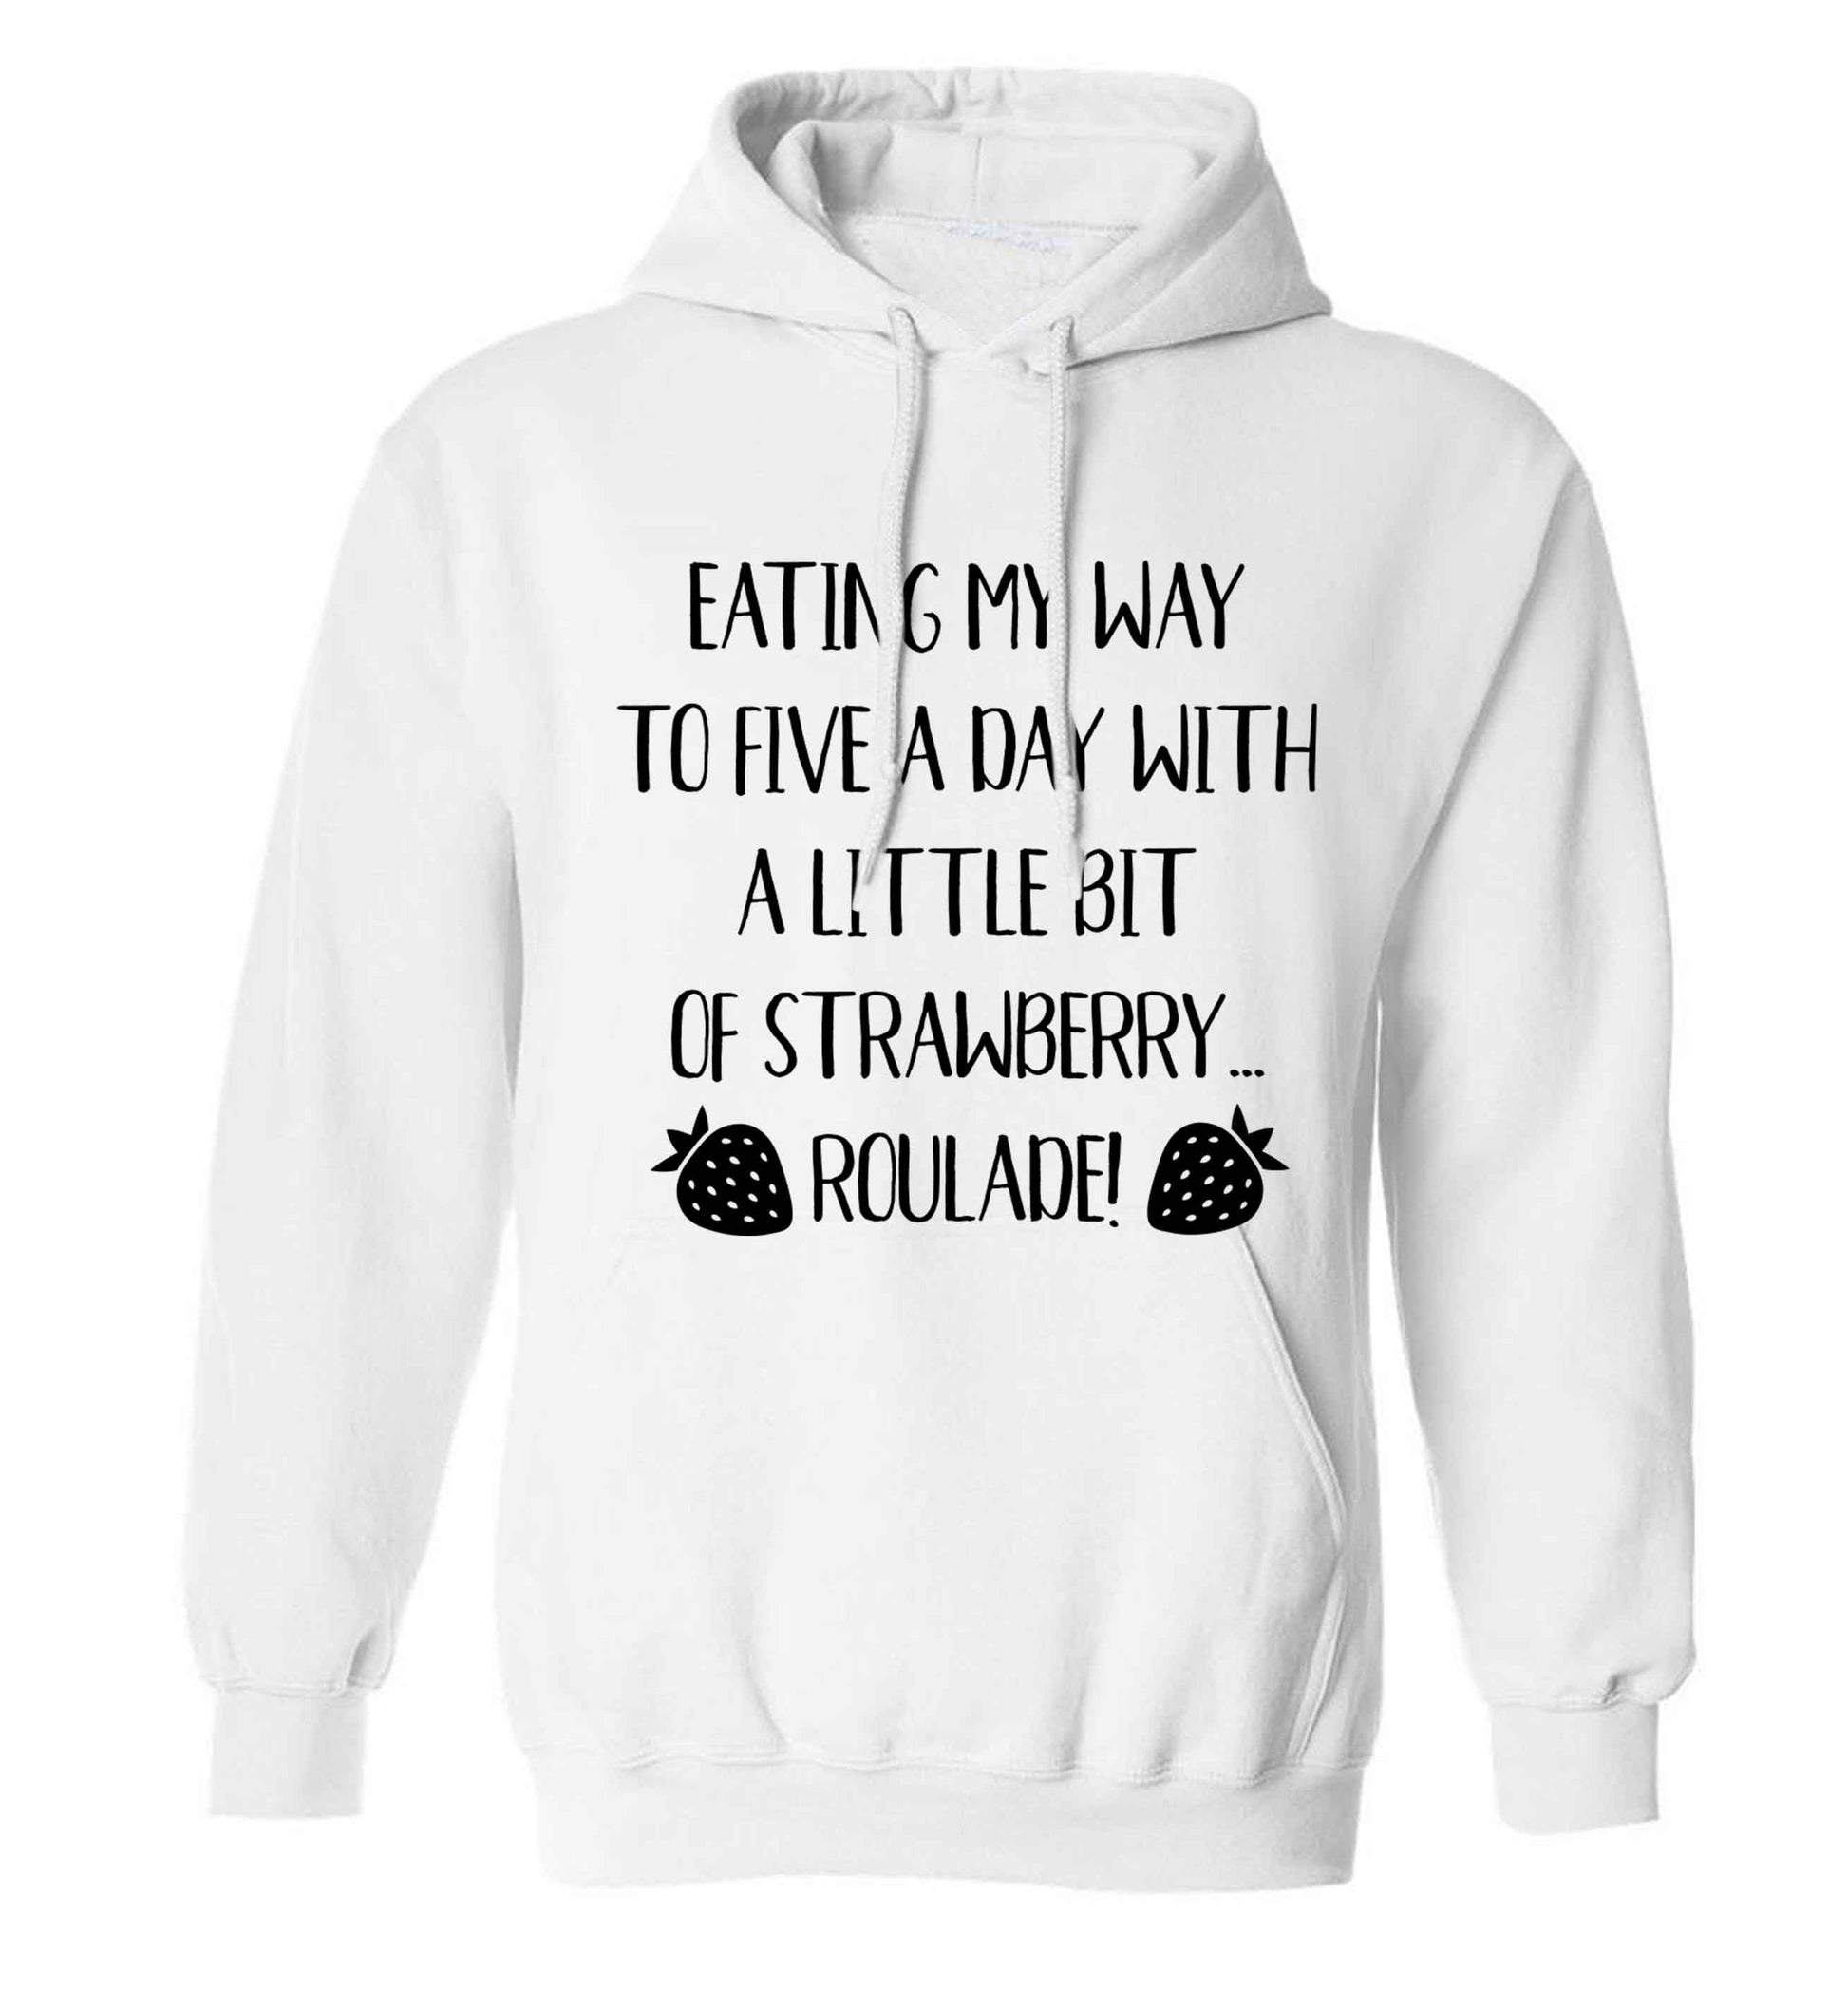 Eating my way to five a day with a little bit of strawberry roulade adults unisex white hoodie 2XL